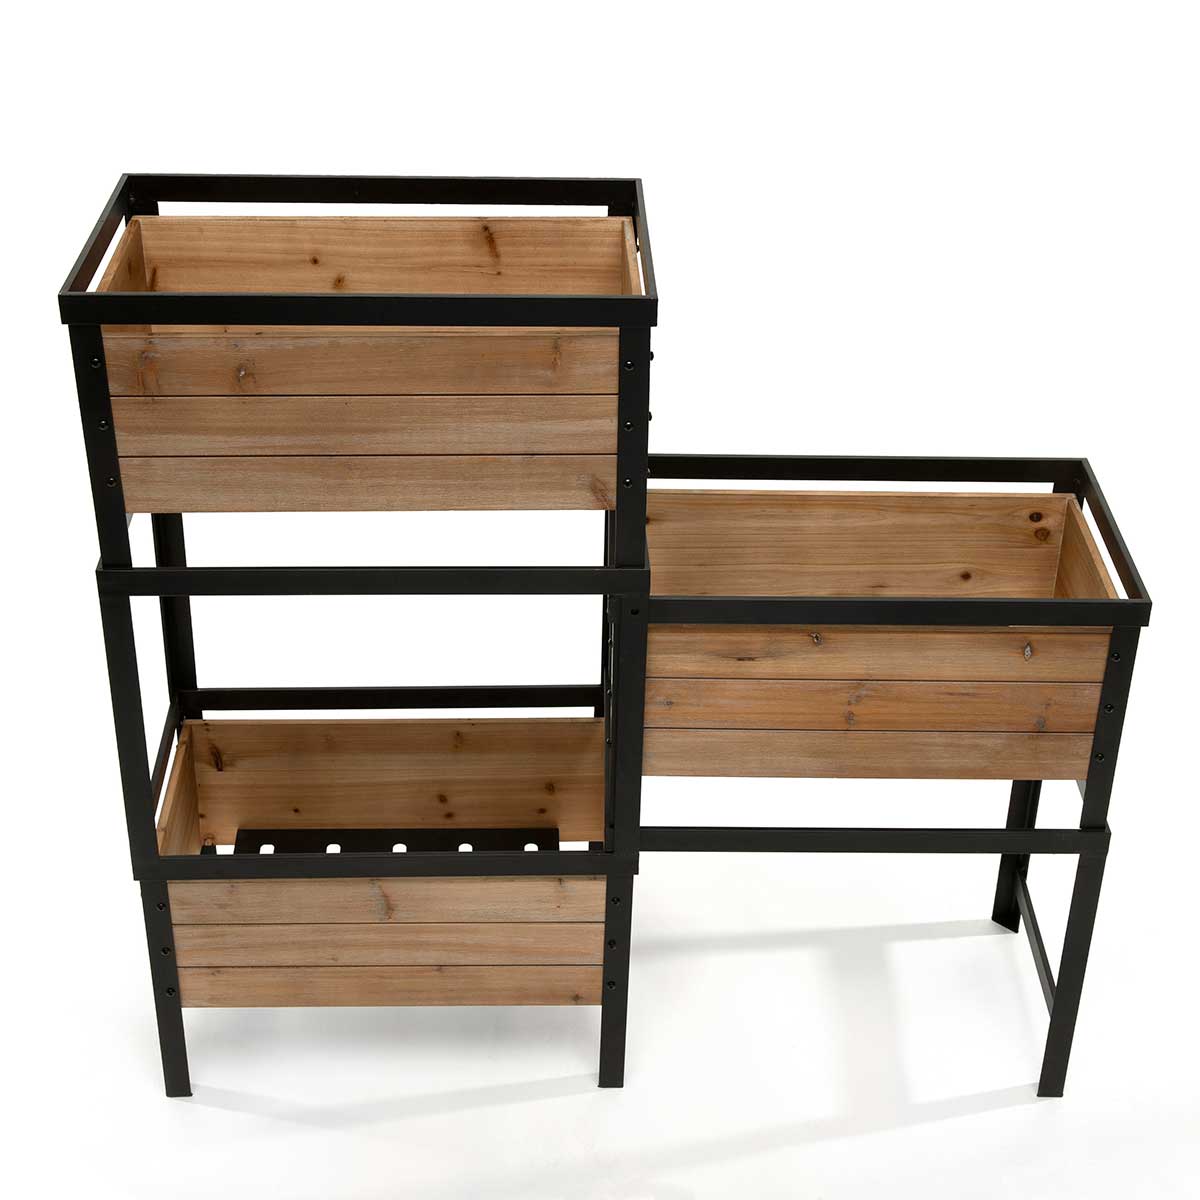 DISPLAY 3 BOX WITH STAND 39IN X 12IN X 36.5IN BROWN/BLACK - Click Image to Close